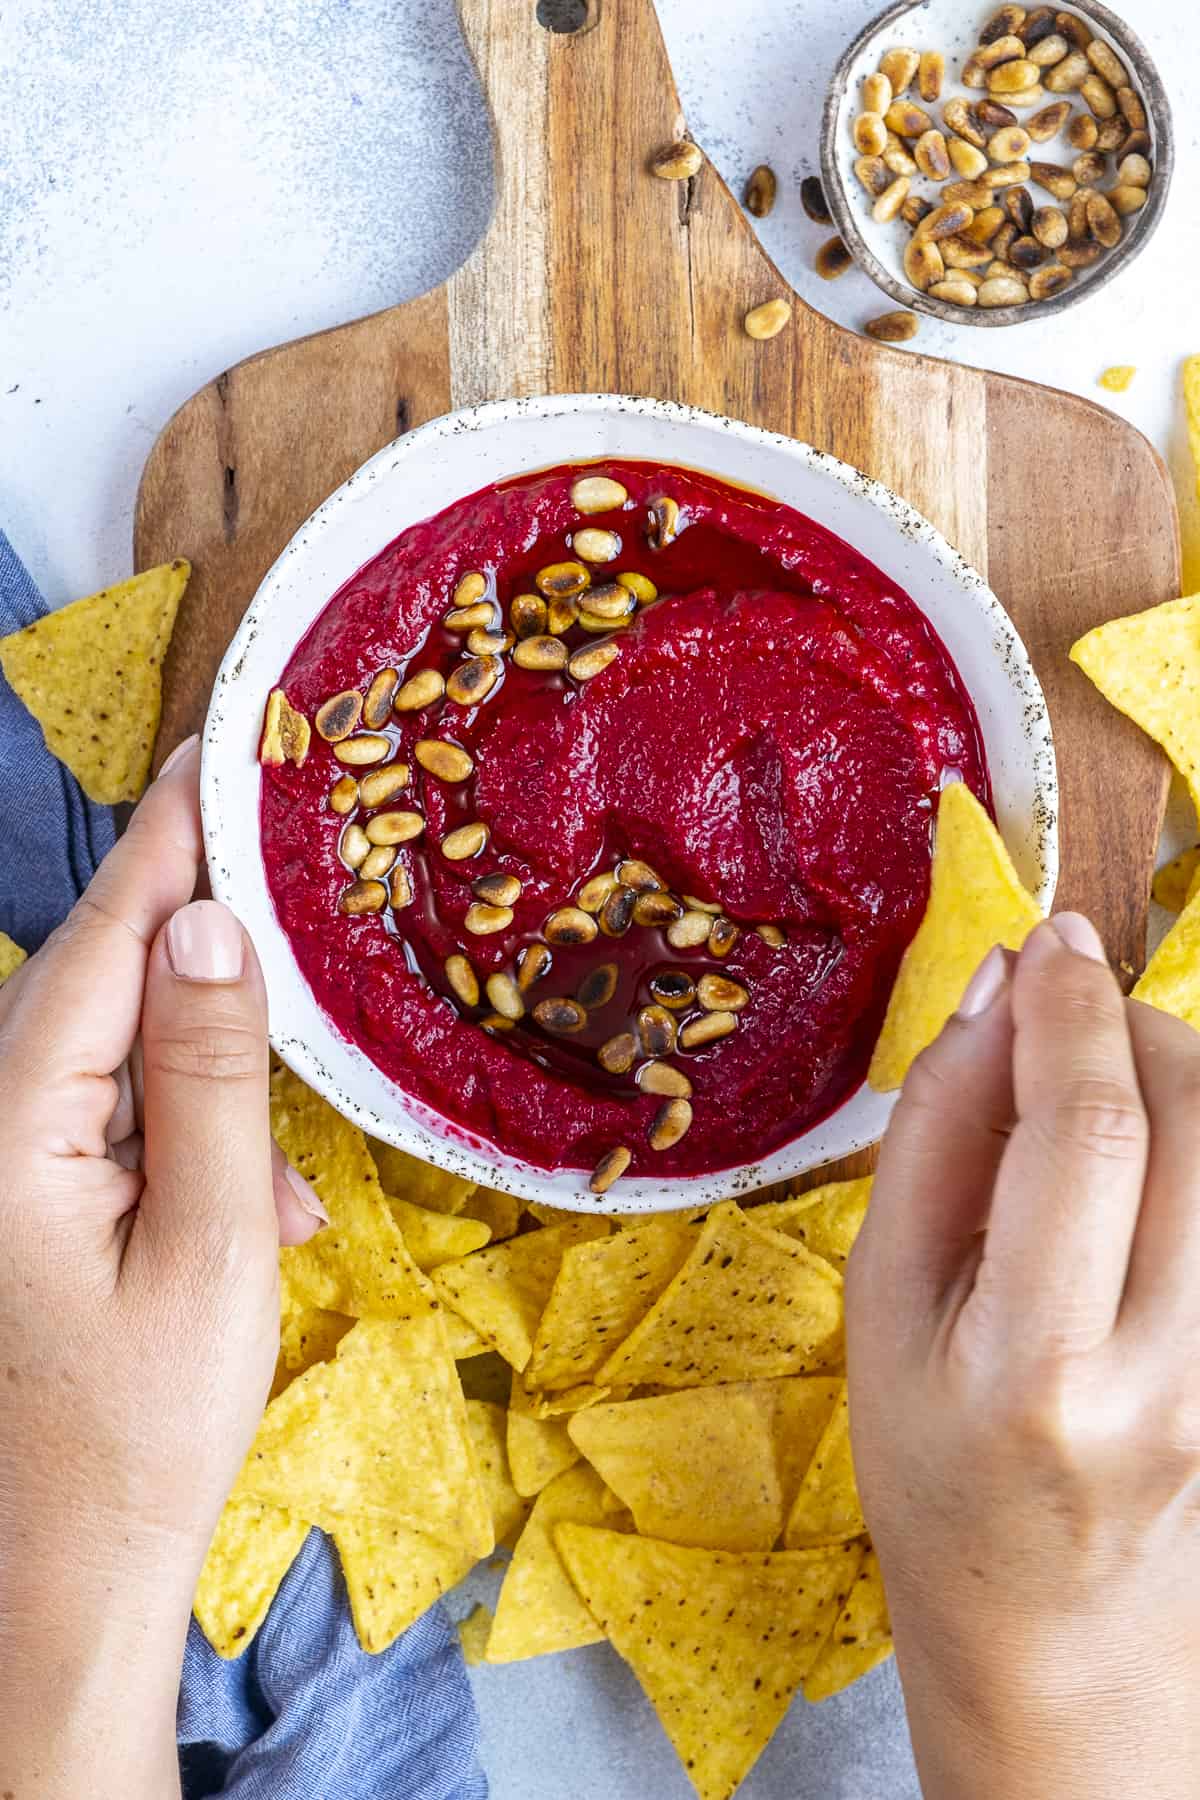 Hands dipping chips into beetroot dip.